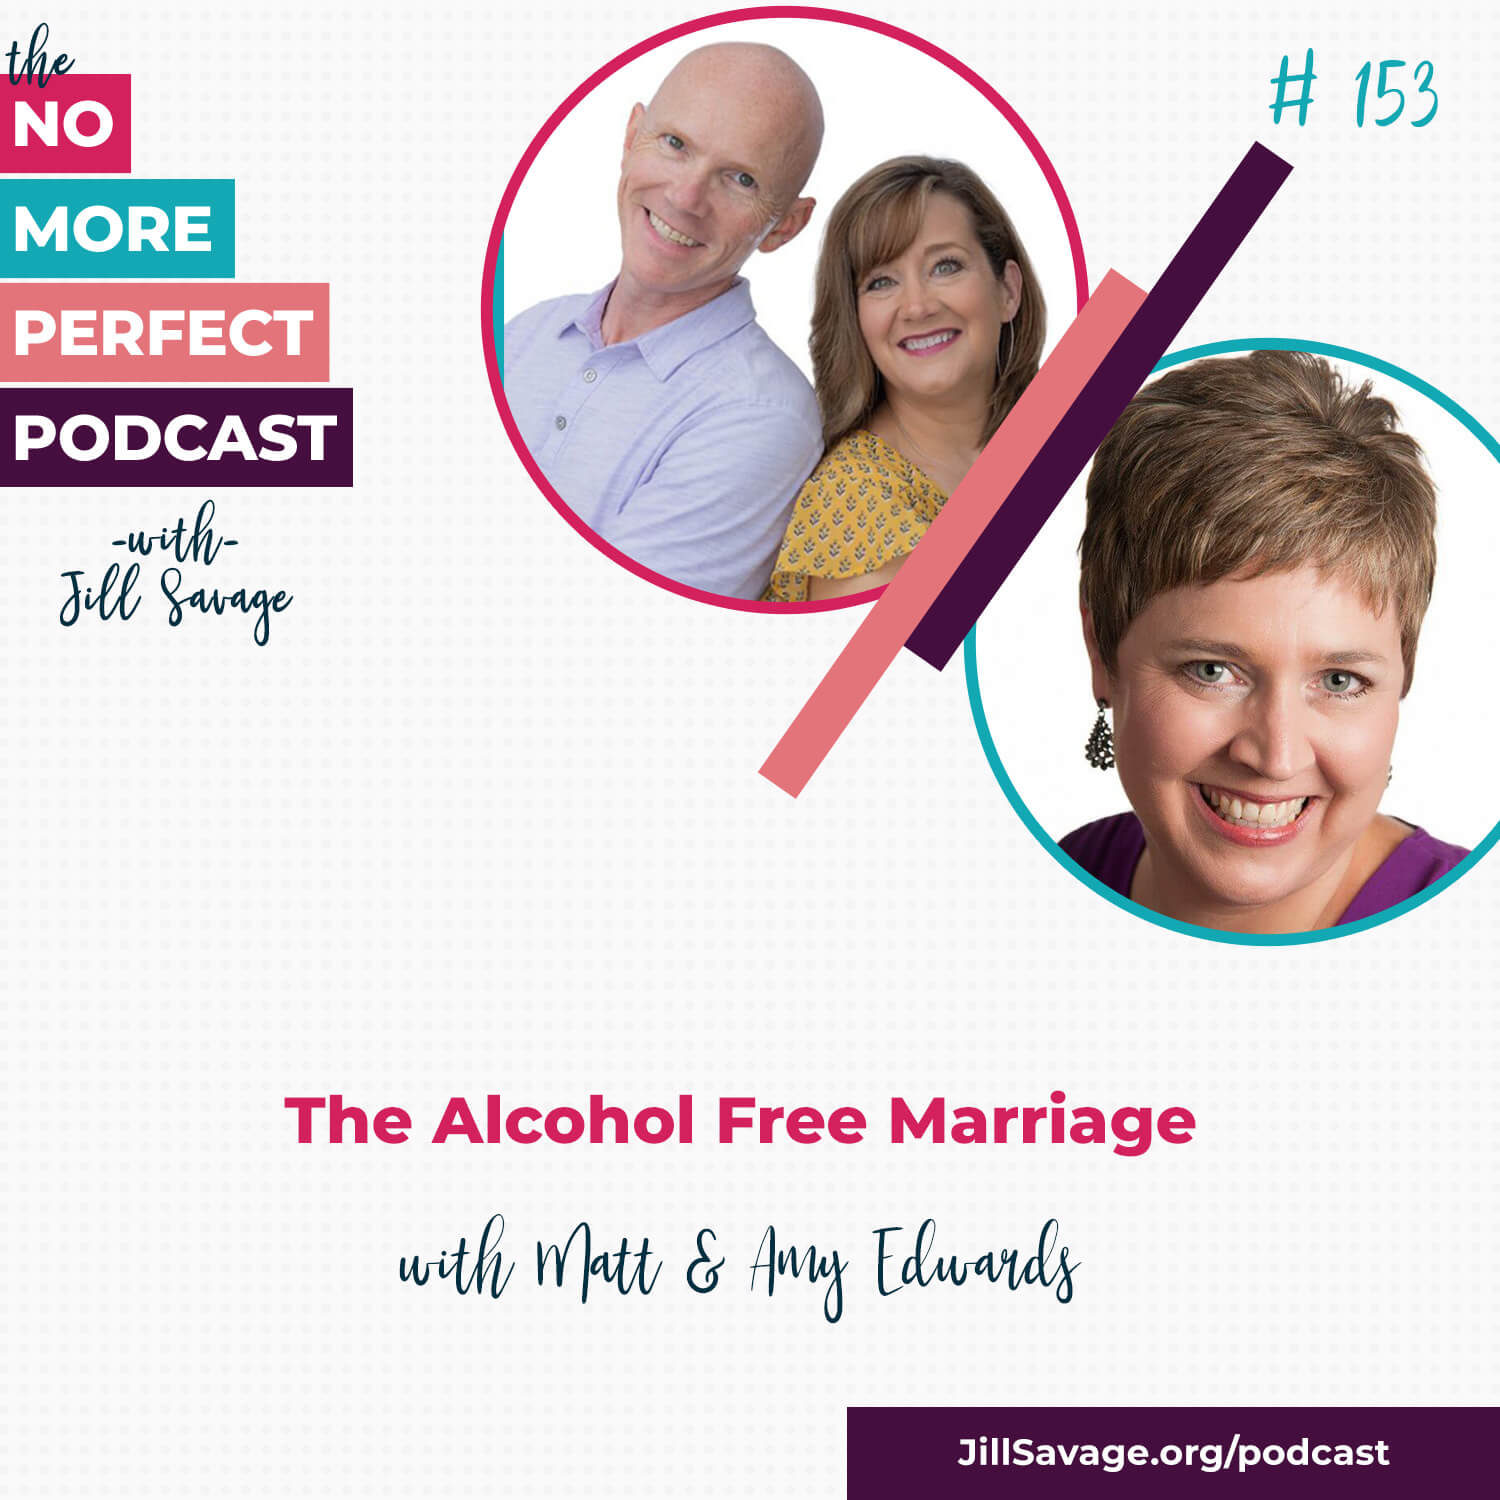 The Alcohol Free Marriage with Matt & Amy Edwards | Episode 153